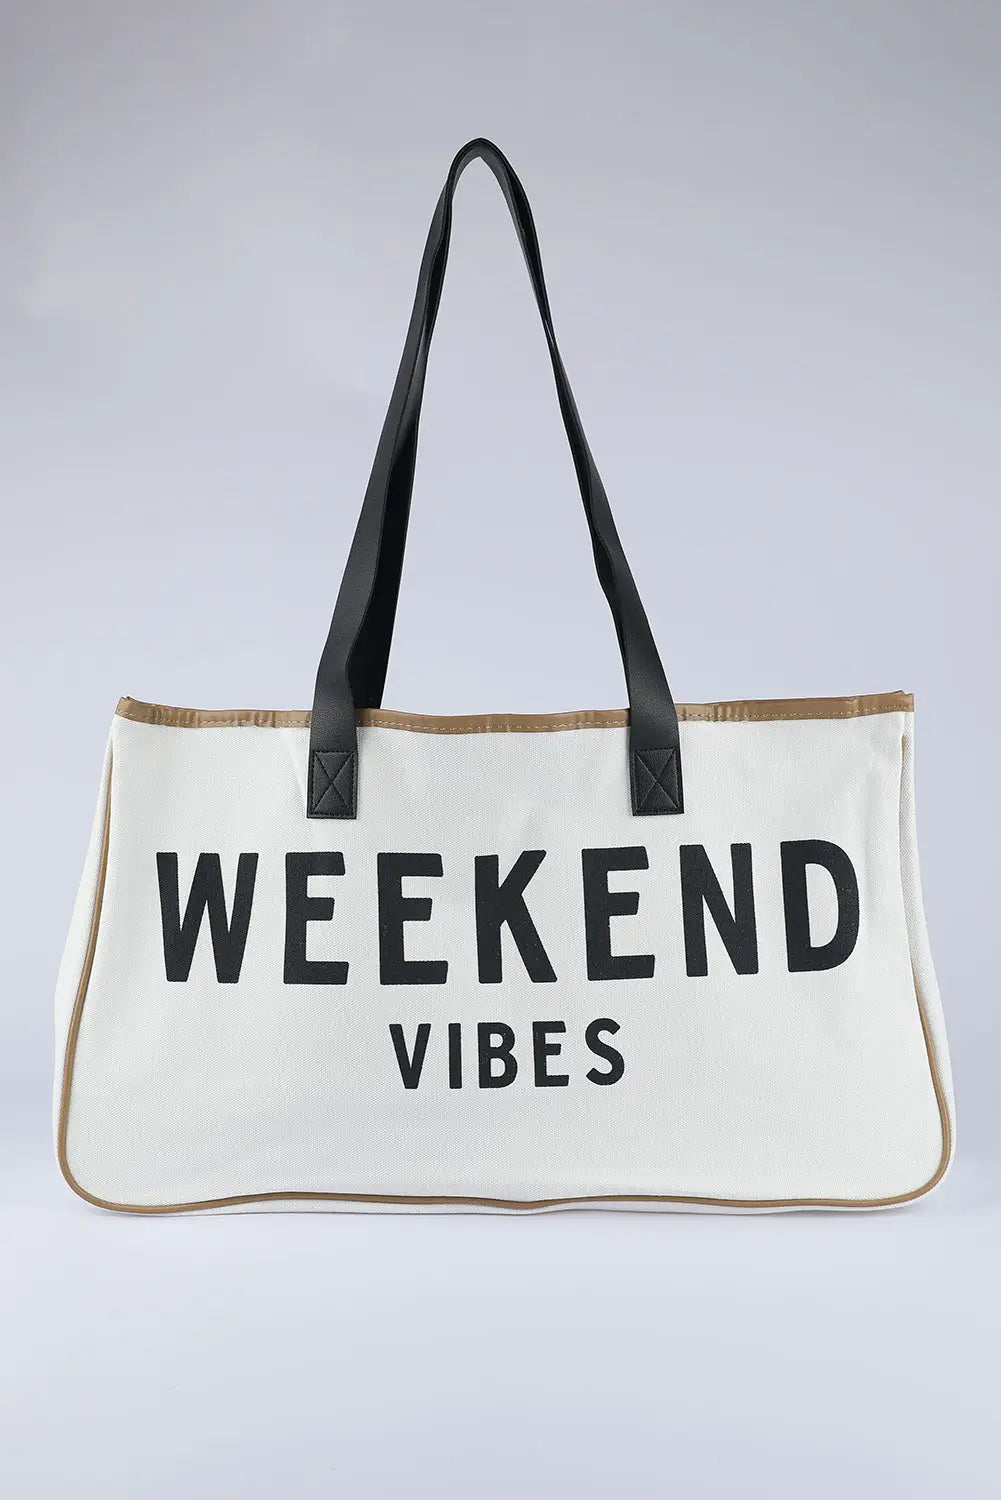 White weekend vibes canvas tote - one size - handbags